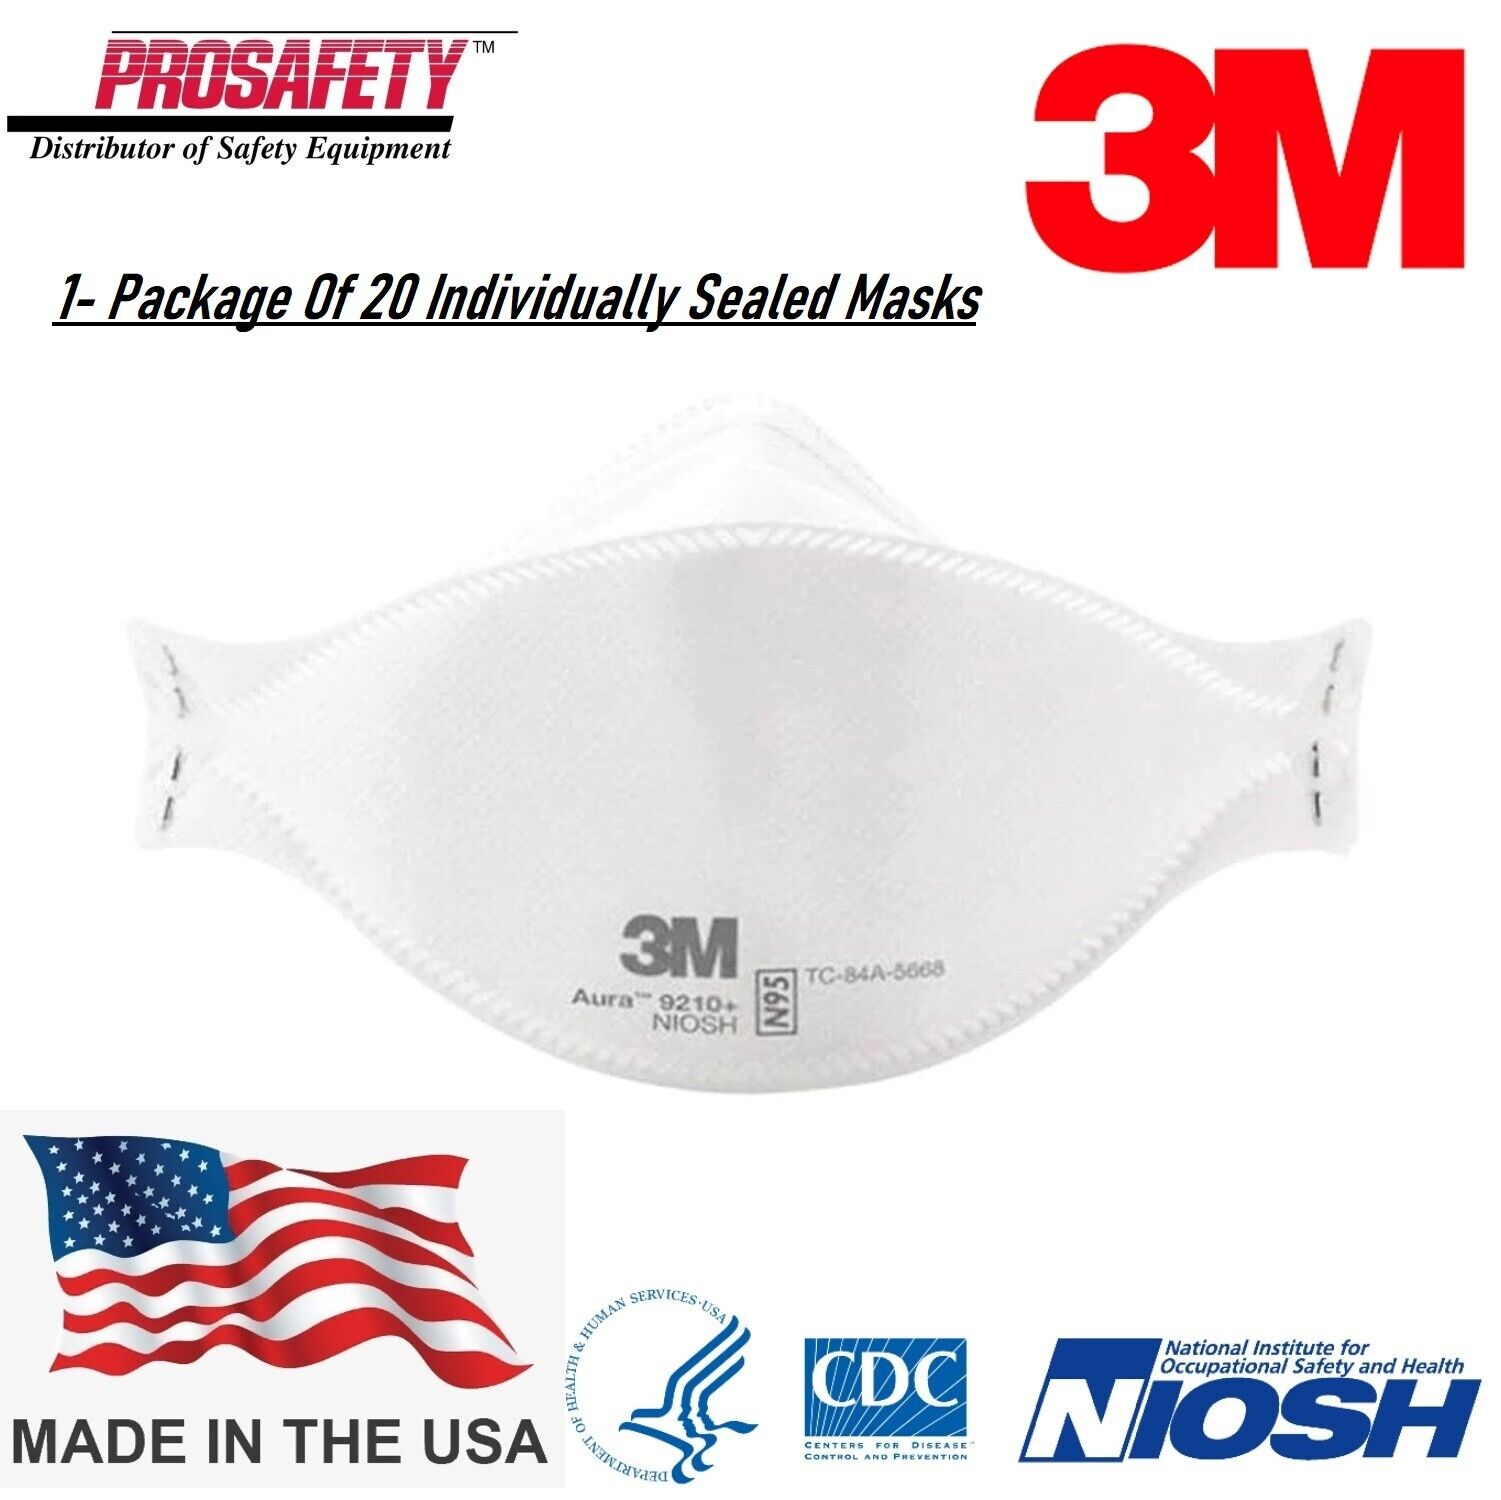 3M 9210+ Aura N95 Sealed Particulate Respirator NIOSH Approved USA Made, 20-Pack 3M 9210+ / 37192